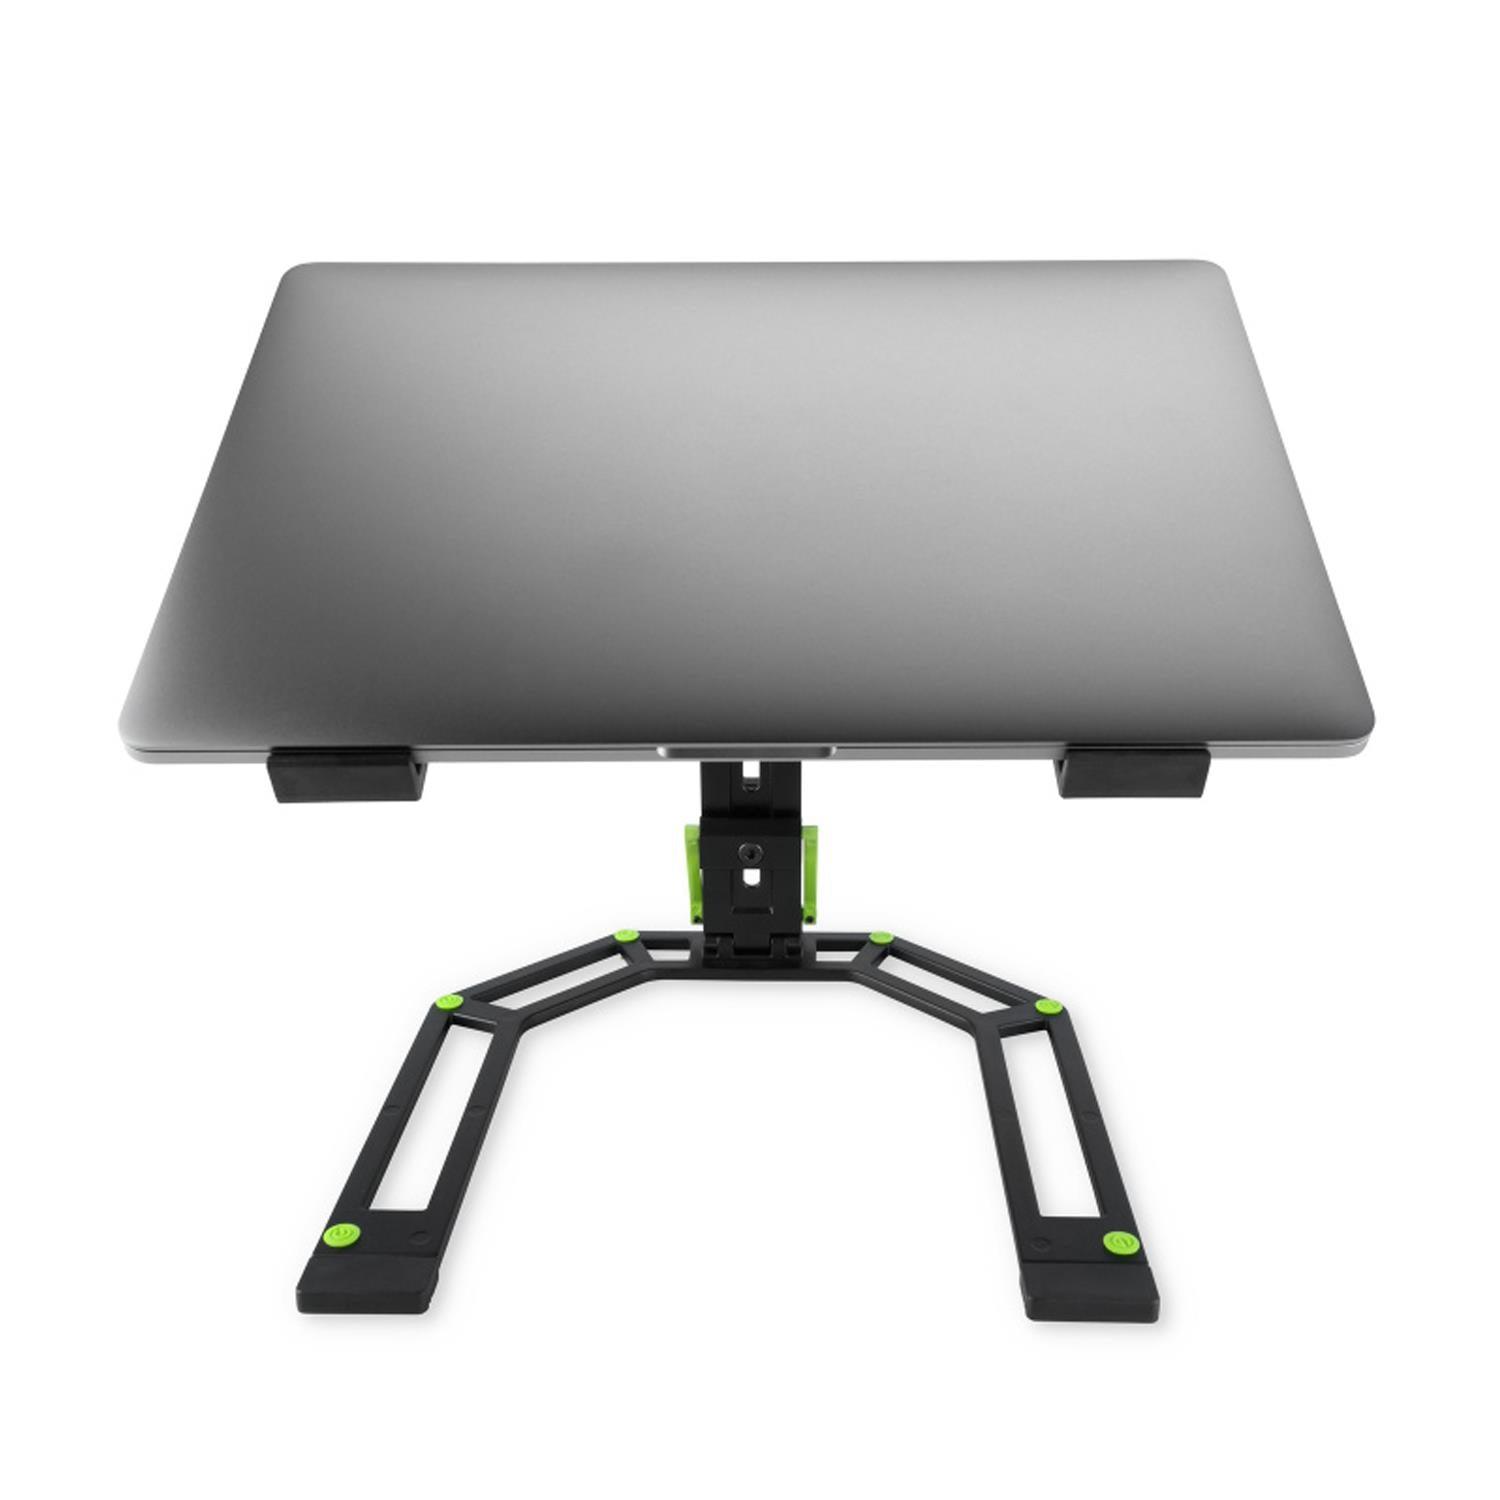 Gravity LTS 01 B SET 1 Adjustable Stand for Laptops and Controllers With Bag - DY Pro Audio